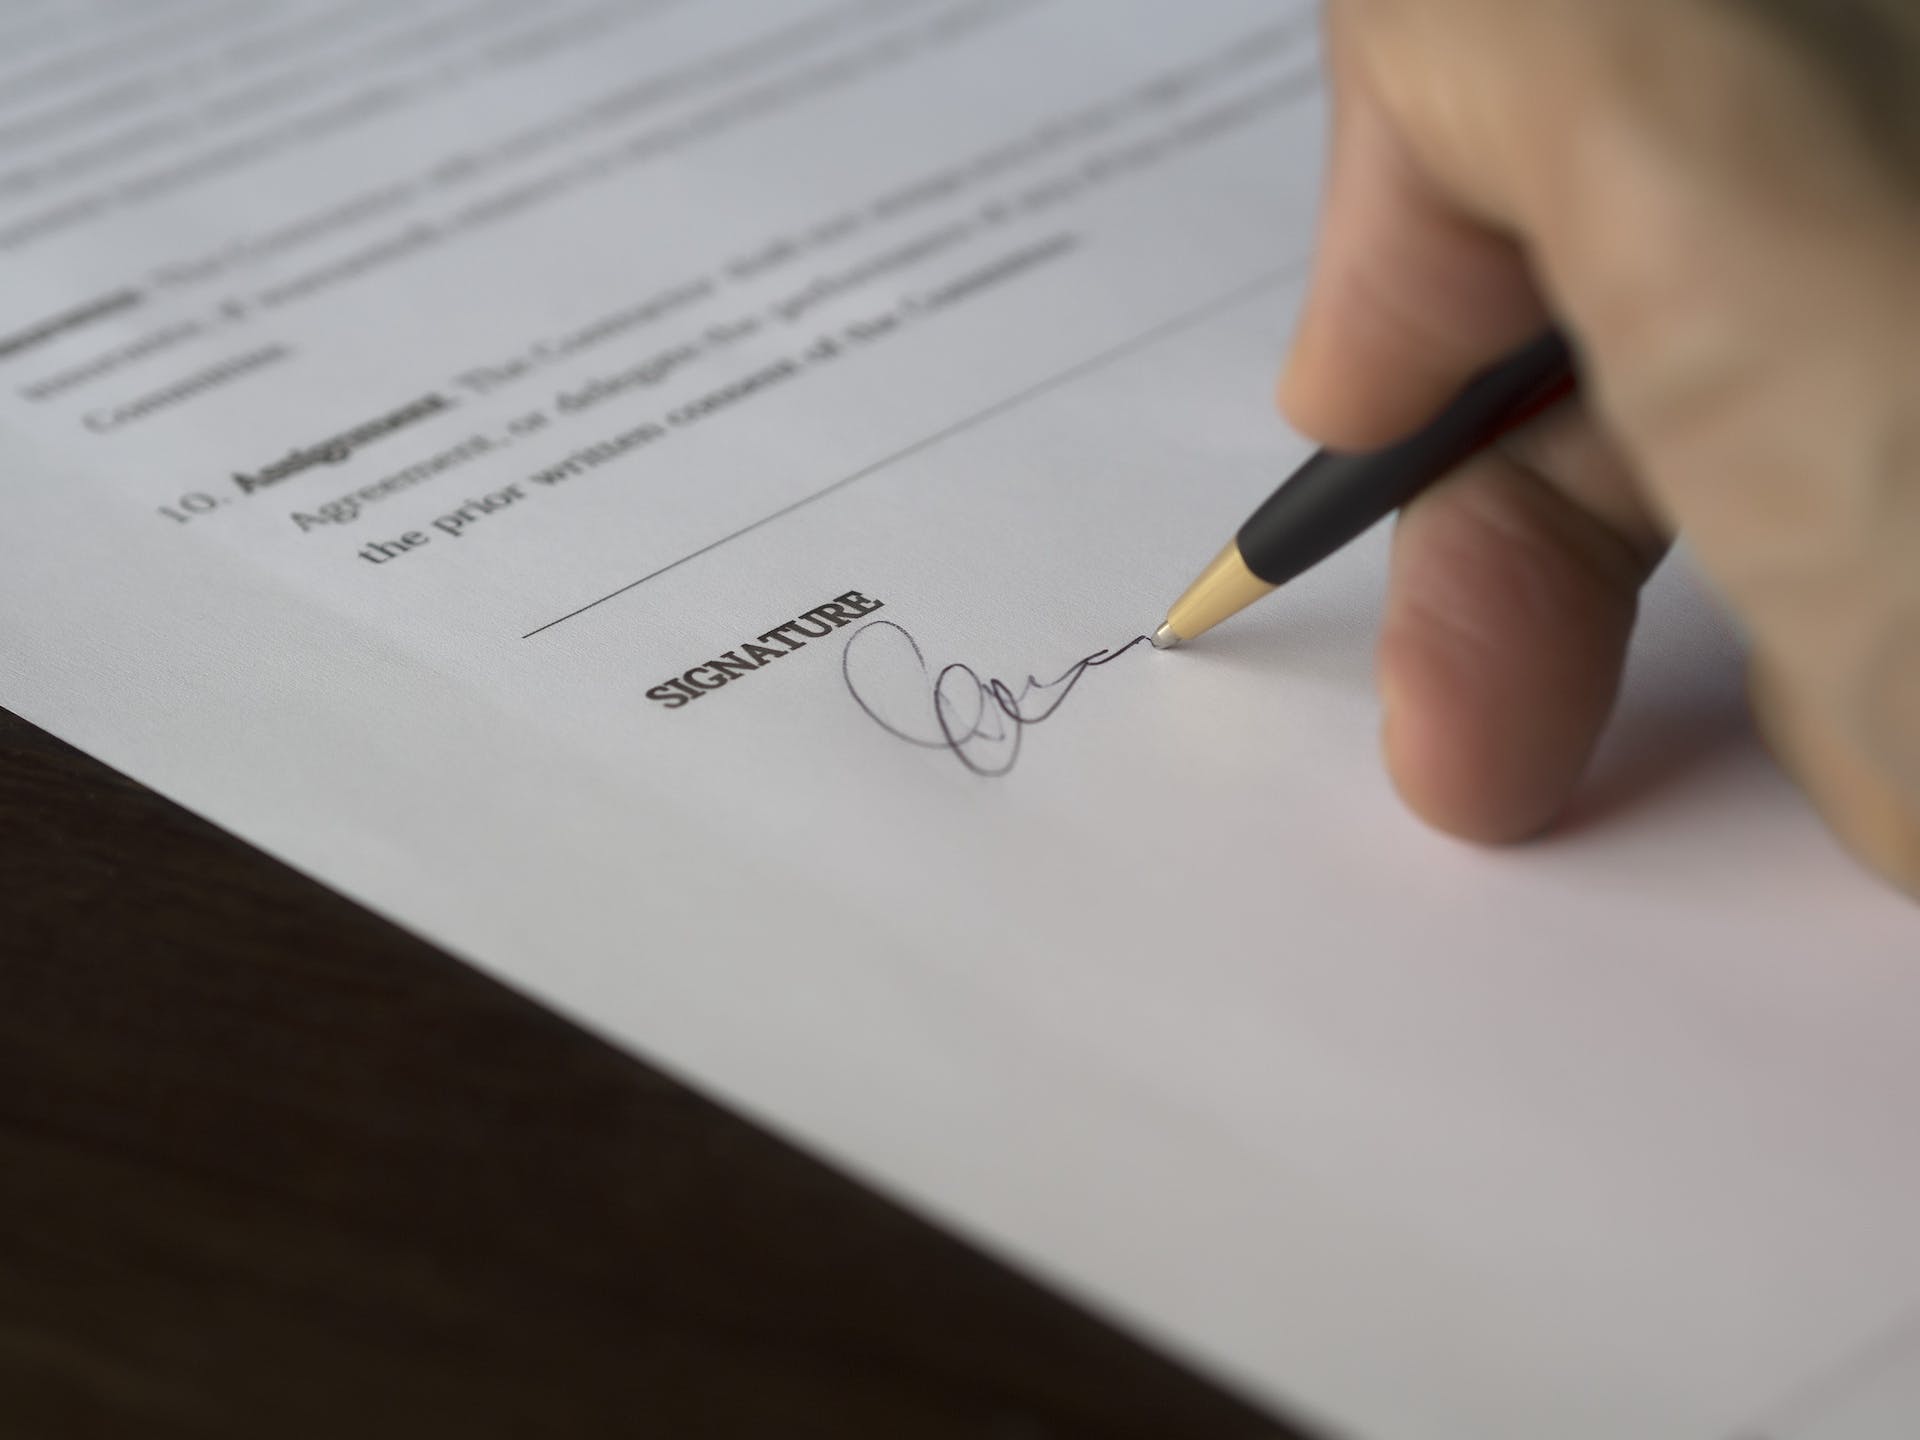 Person signing paperwork | Source: Pexels